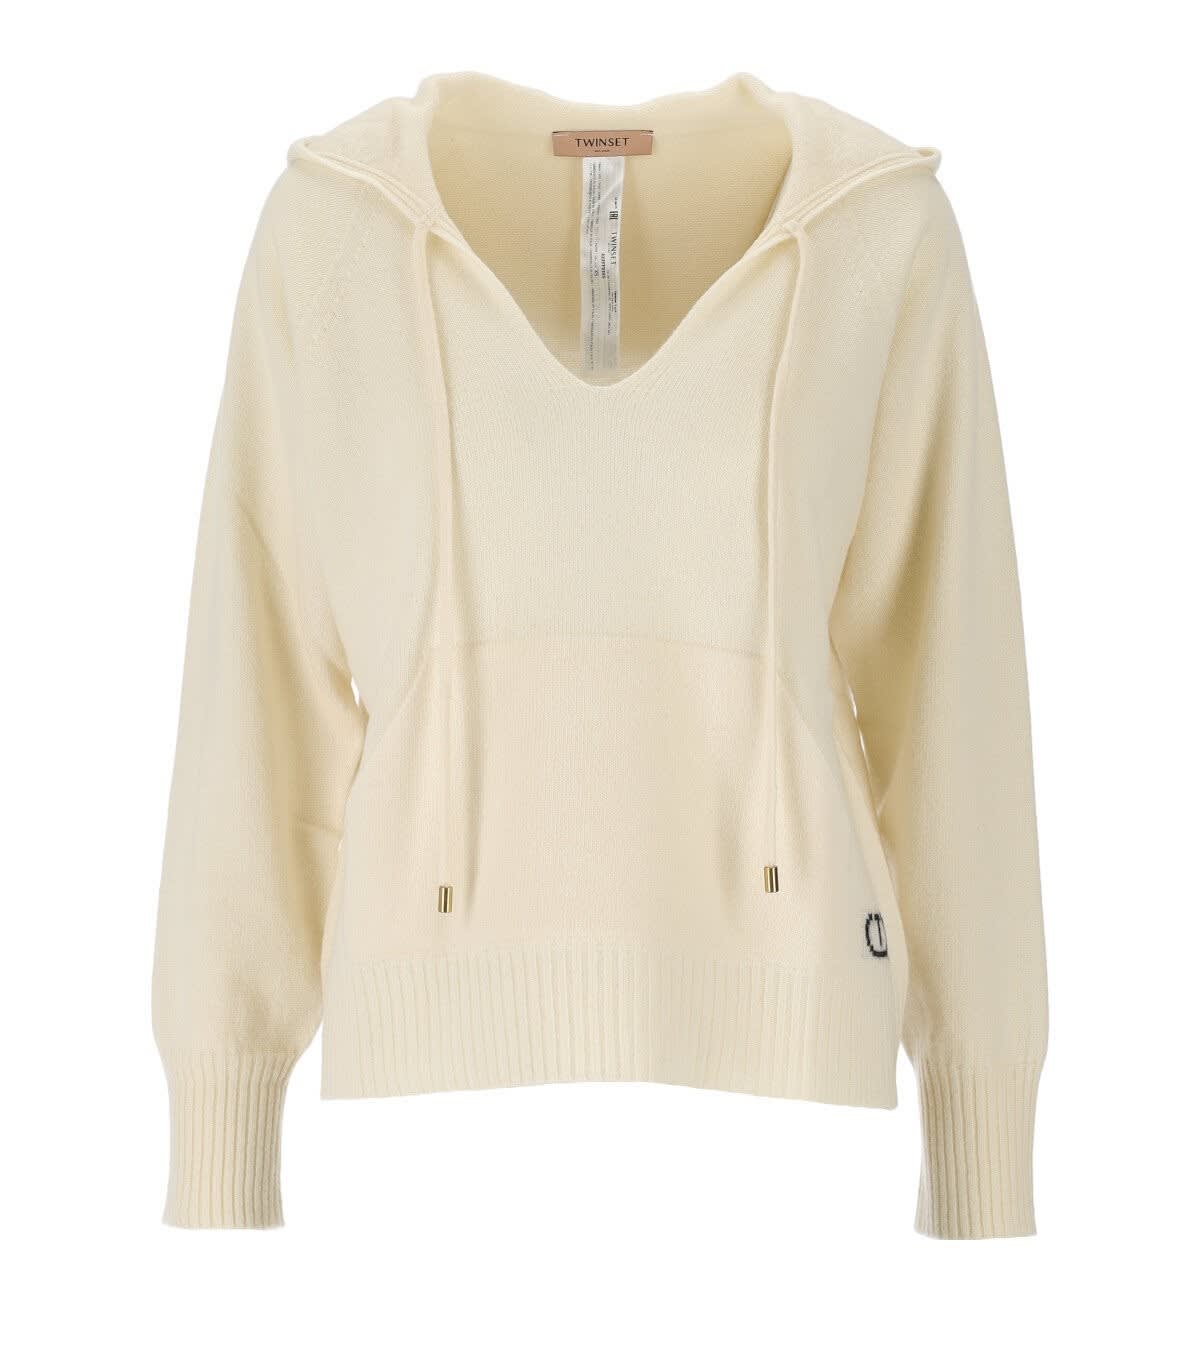 Twinset Cream Knitted Hoodie